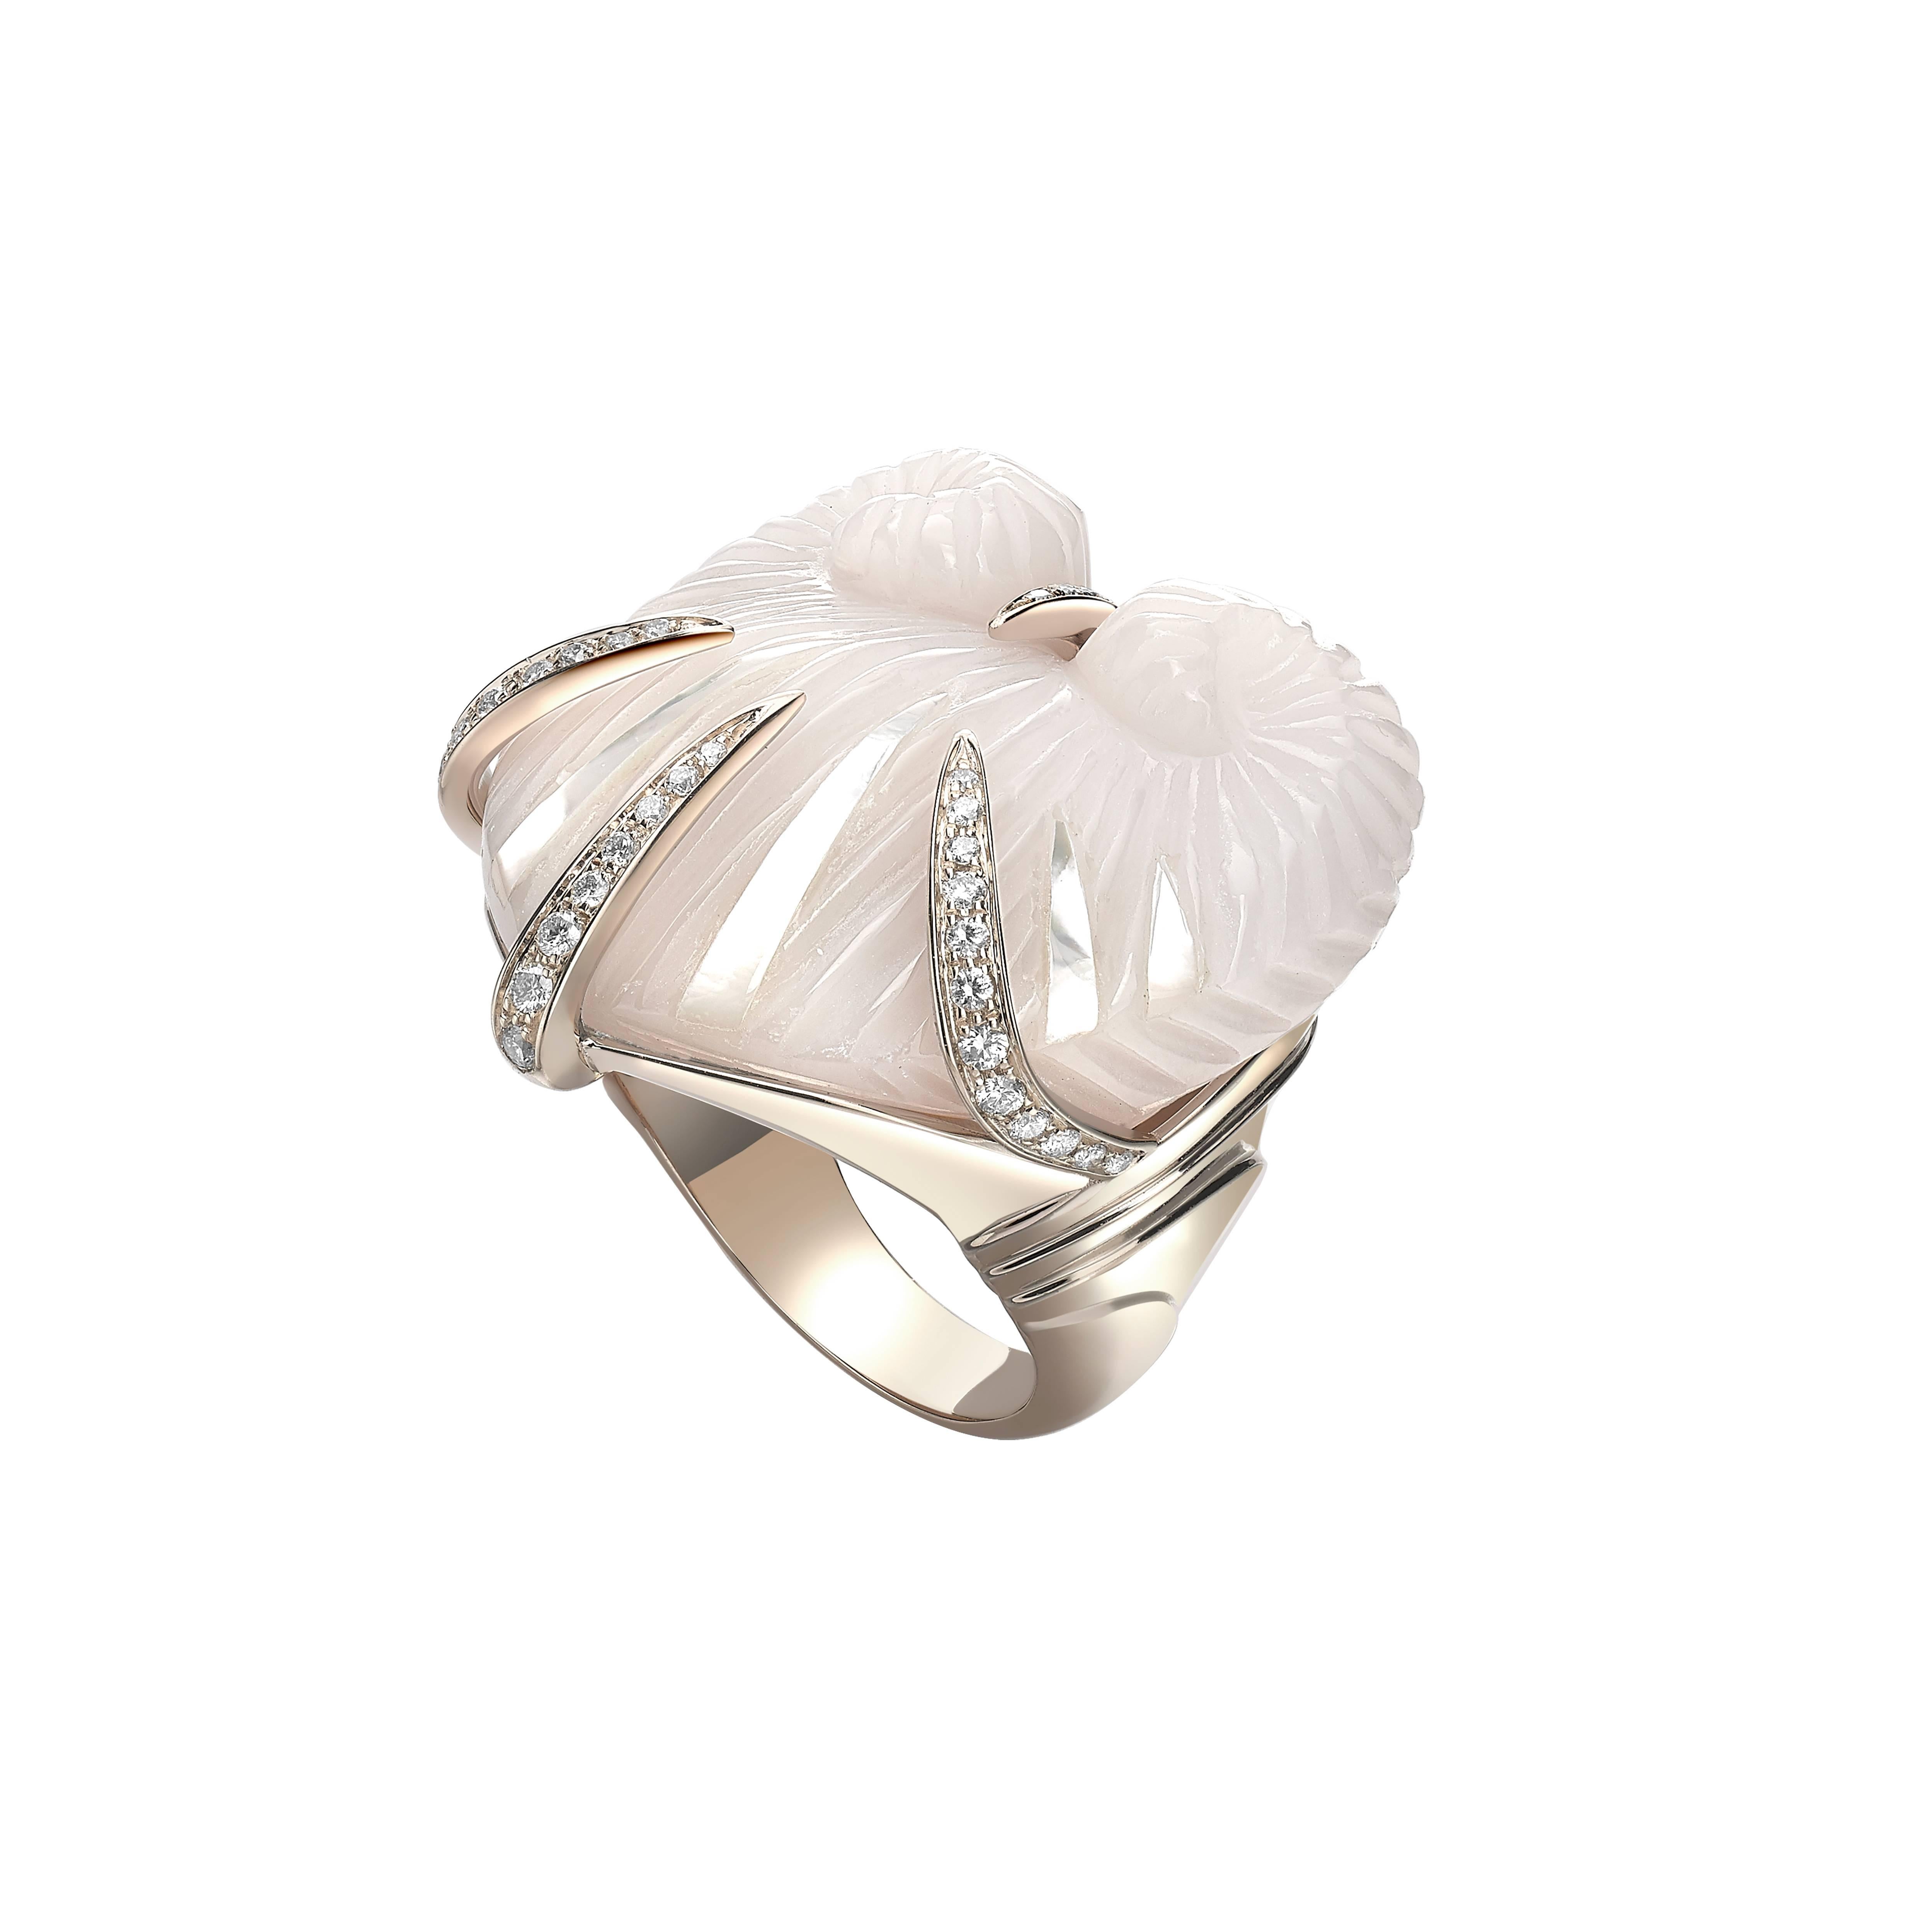 Ring size 49, 51 & 53 available.
(Alternative sizes available on a made to order basis, with an estimated delivery time of 4-6 weeks)

18k White Gold approx. 12.10gr, 40 Diamonds 0.38ct and 1 Pink Chalcedony with Mother Of Pearl 52.50ct

Shells – an